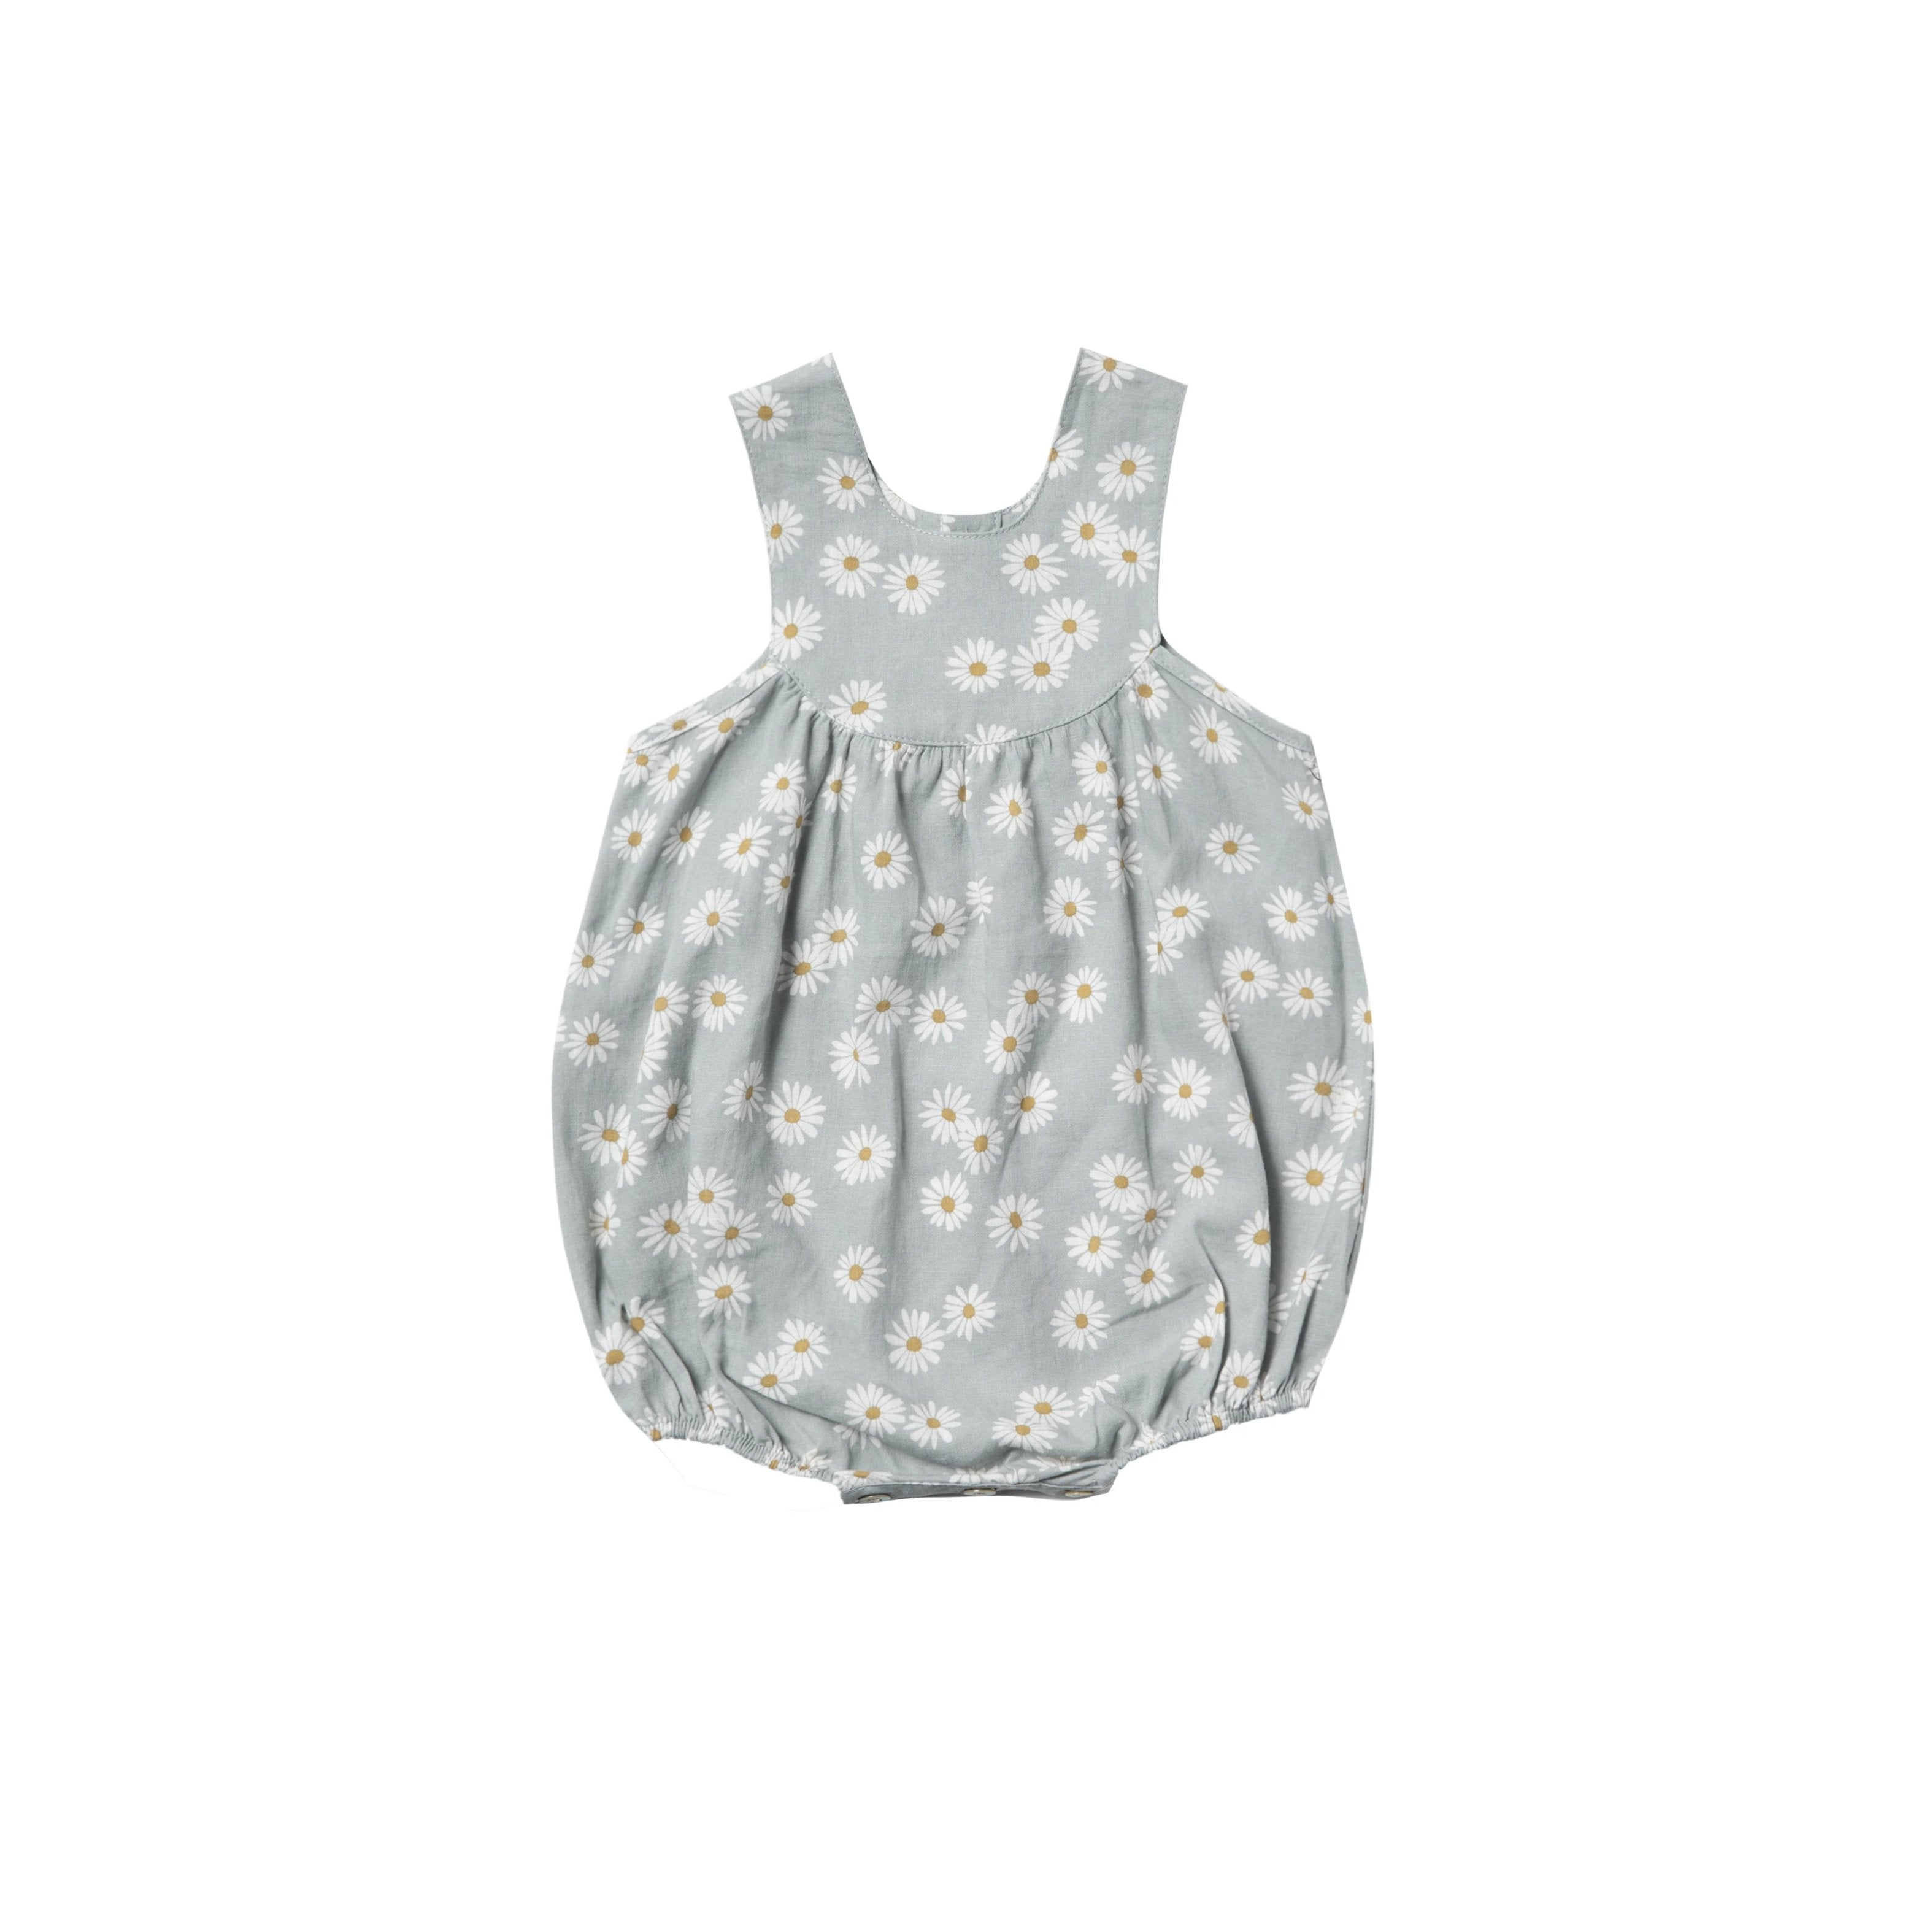 Rylee and Cru Bubble Onesie with Daisies at Bonjour Baby Baskets, best baby shower gifts